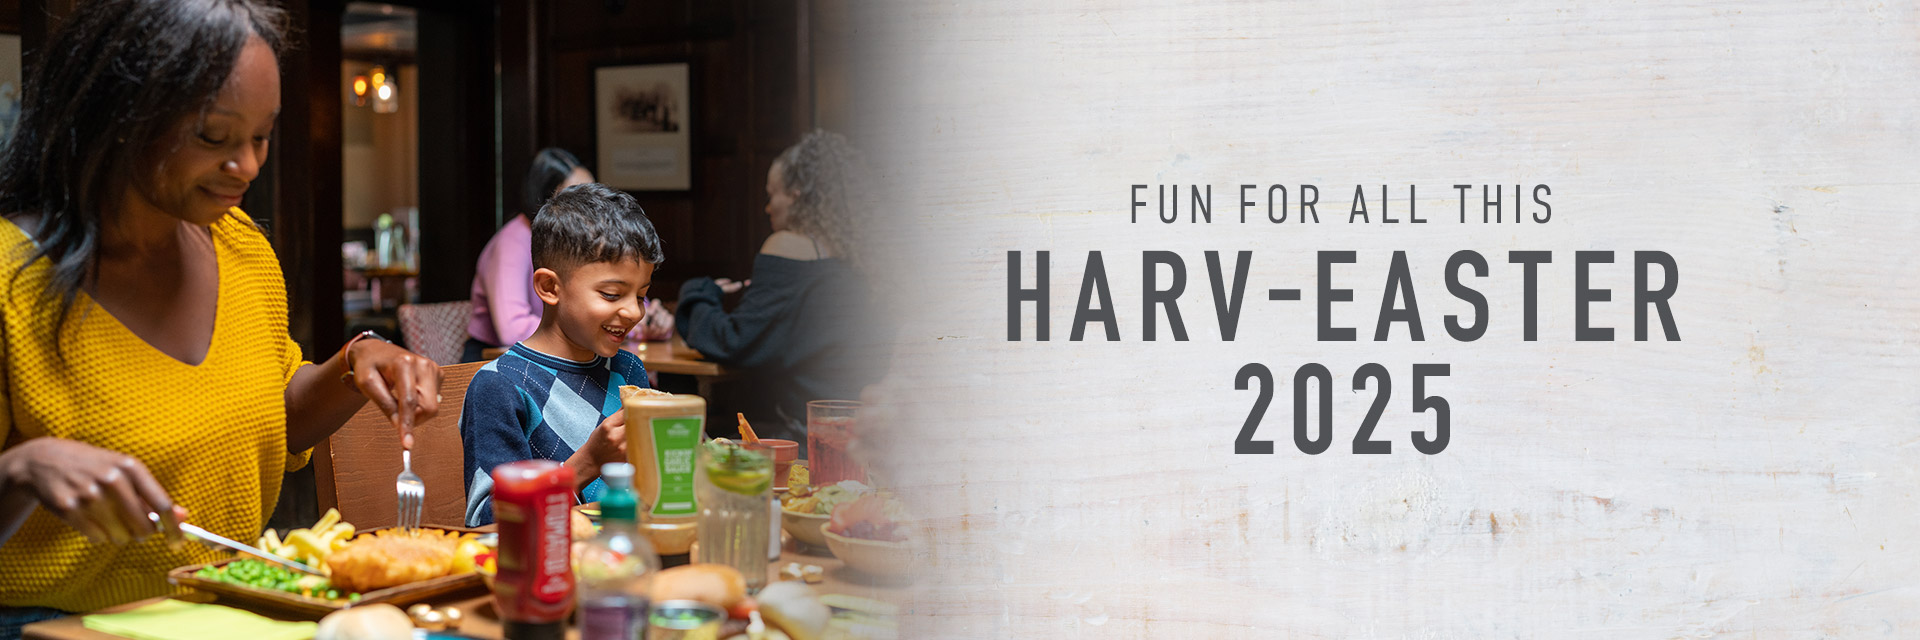 Easter at The Colton Mill Harvester in Leeds 2025